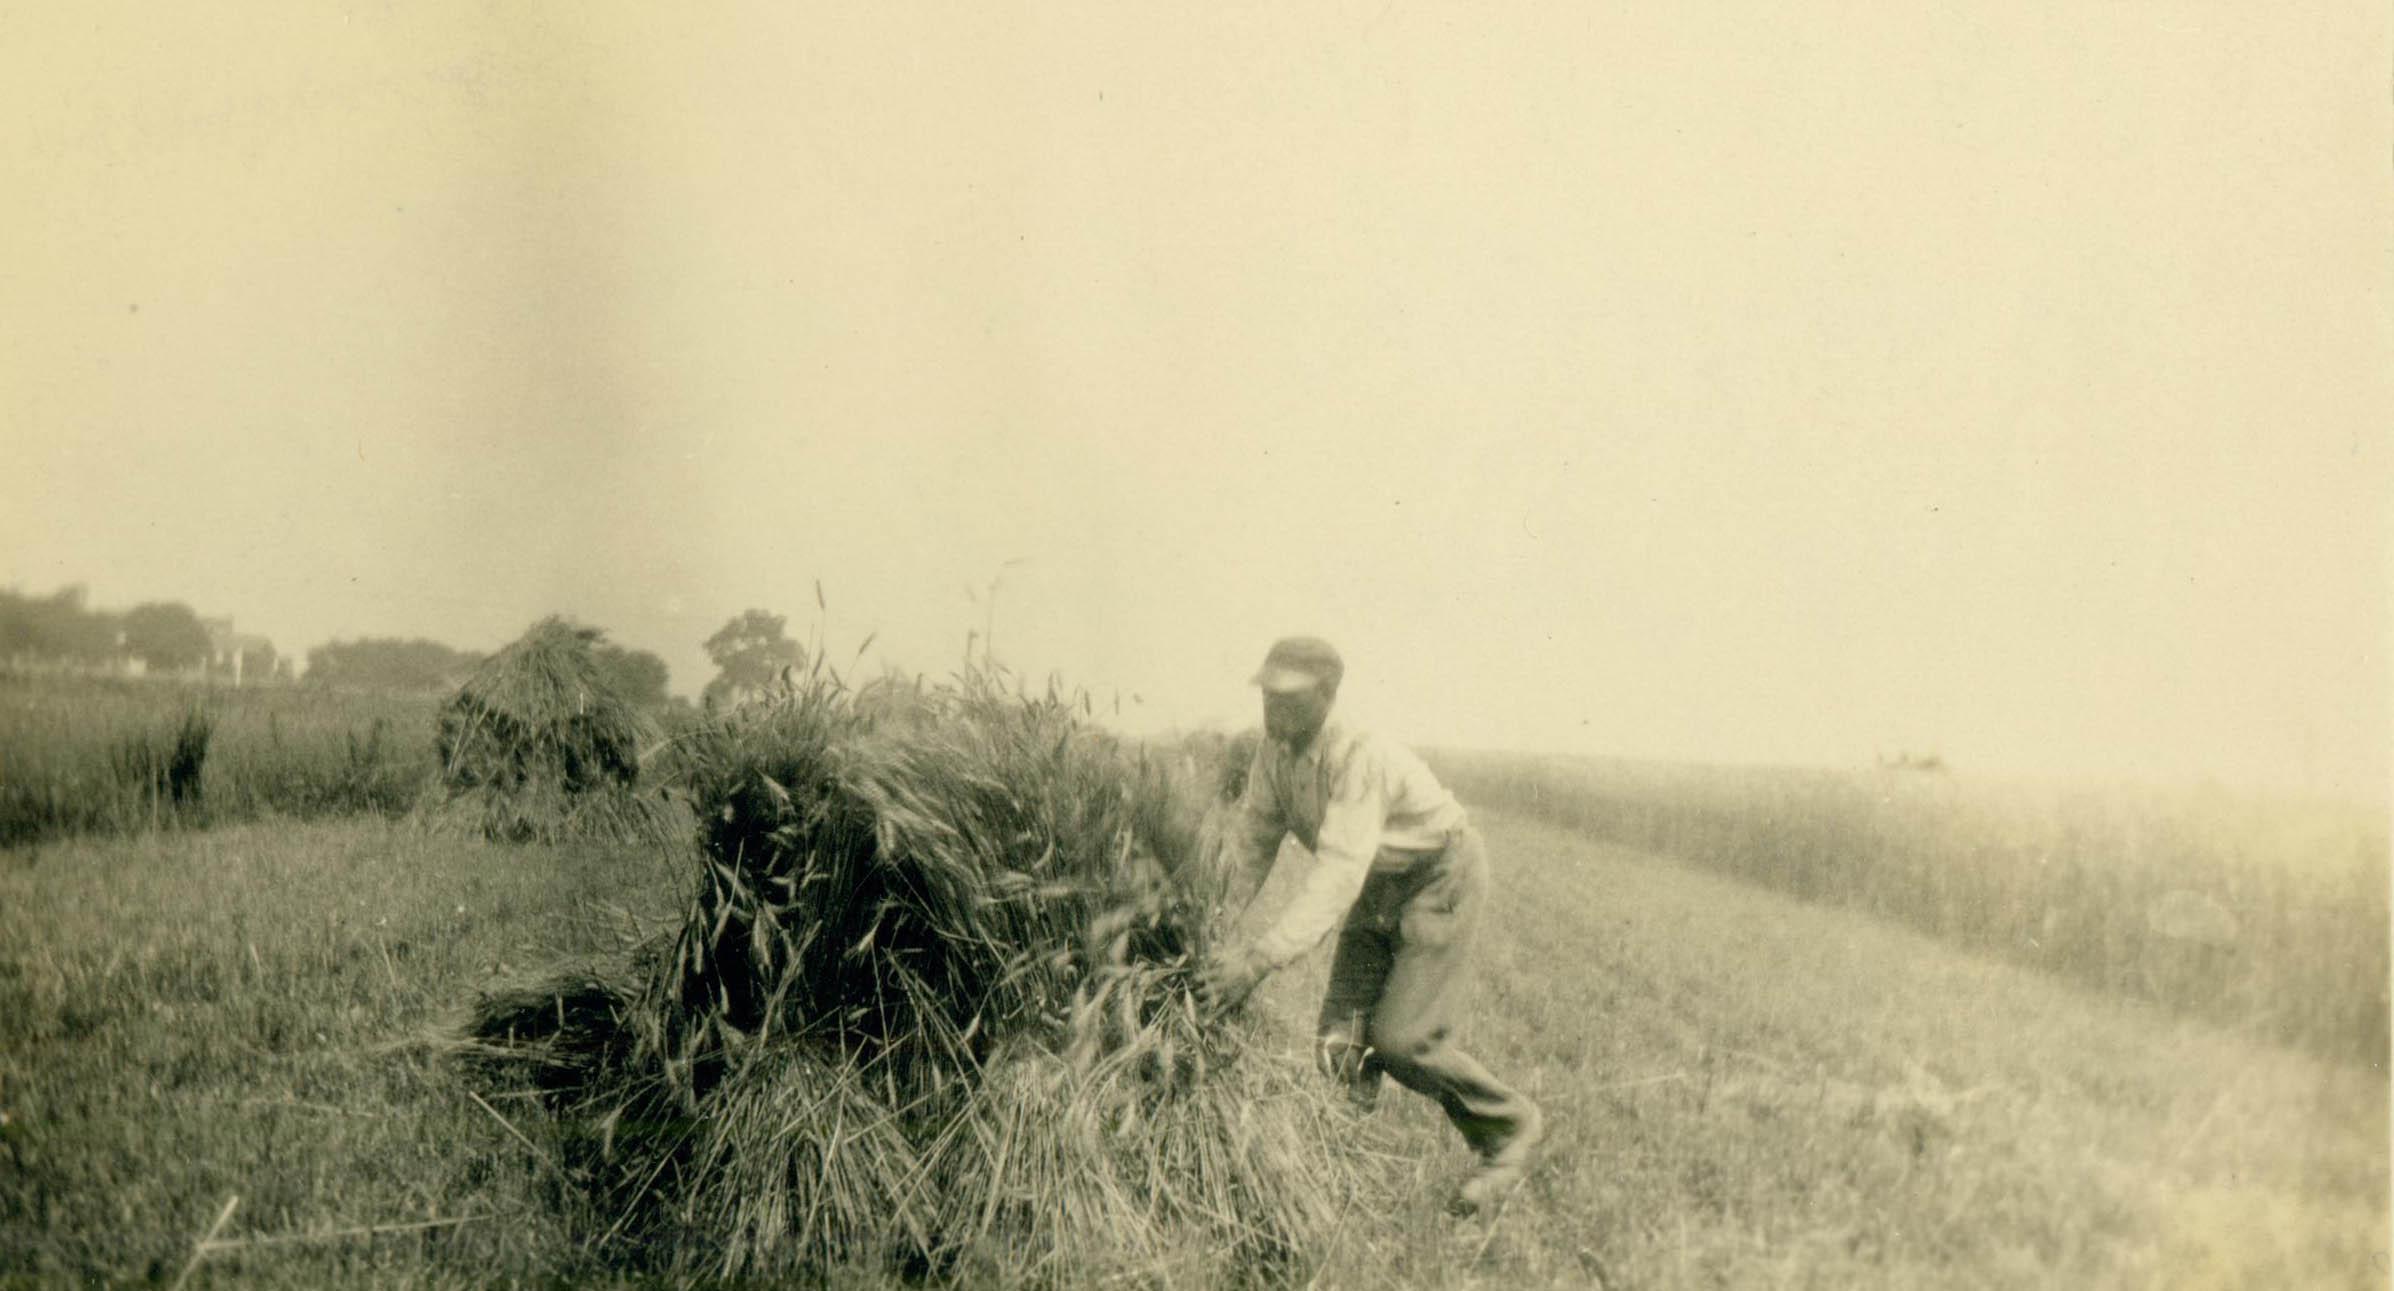 Black man at work in a field